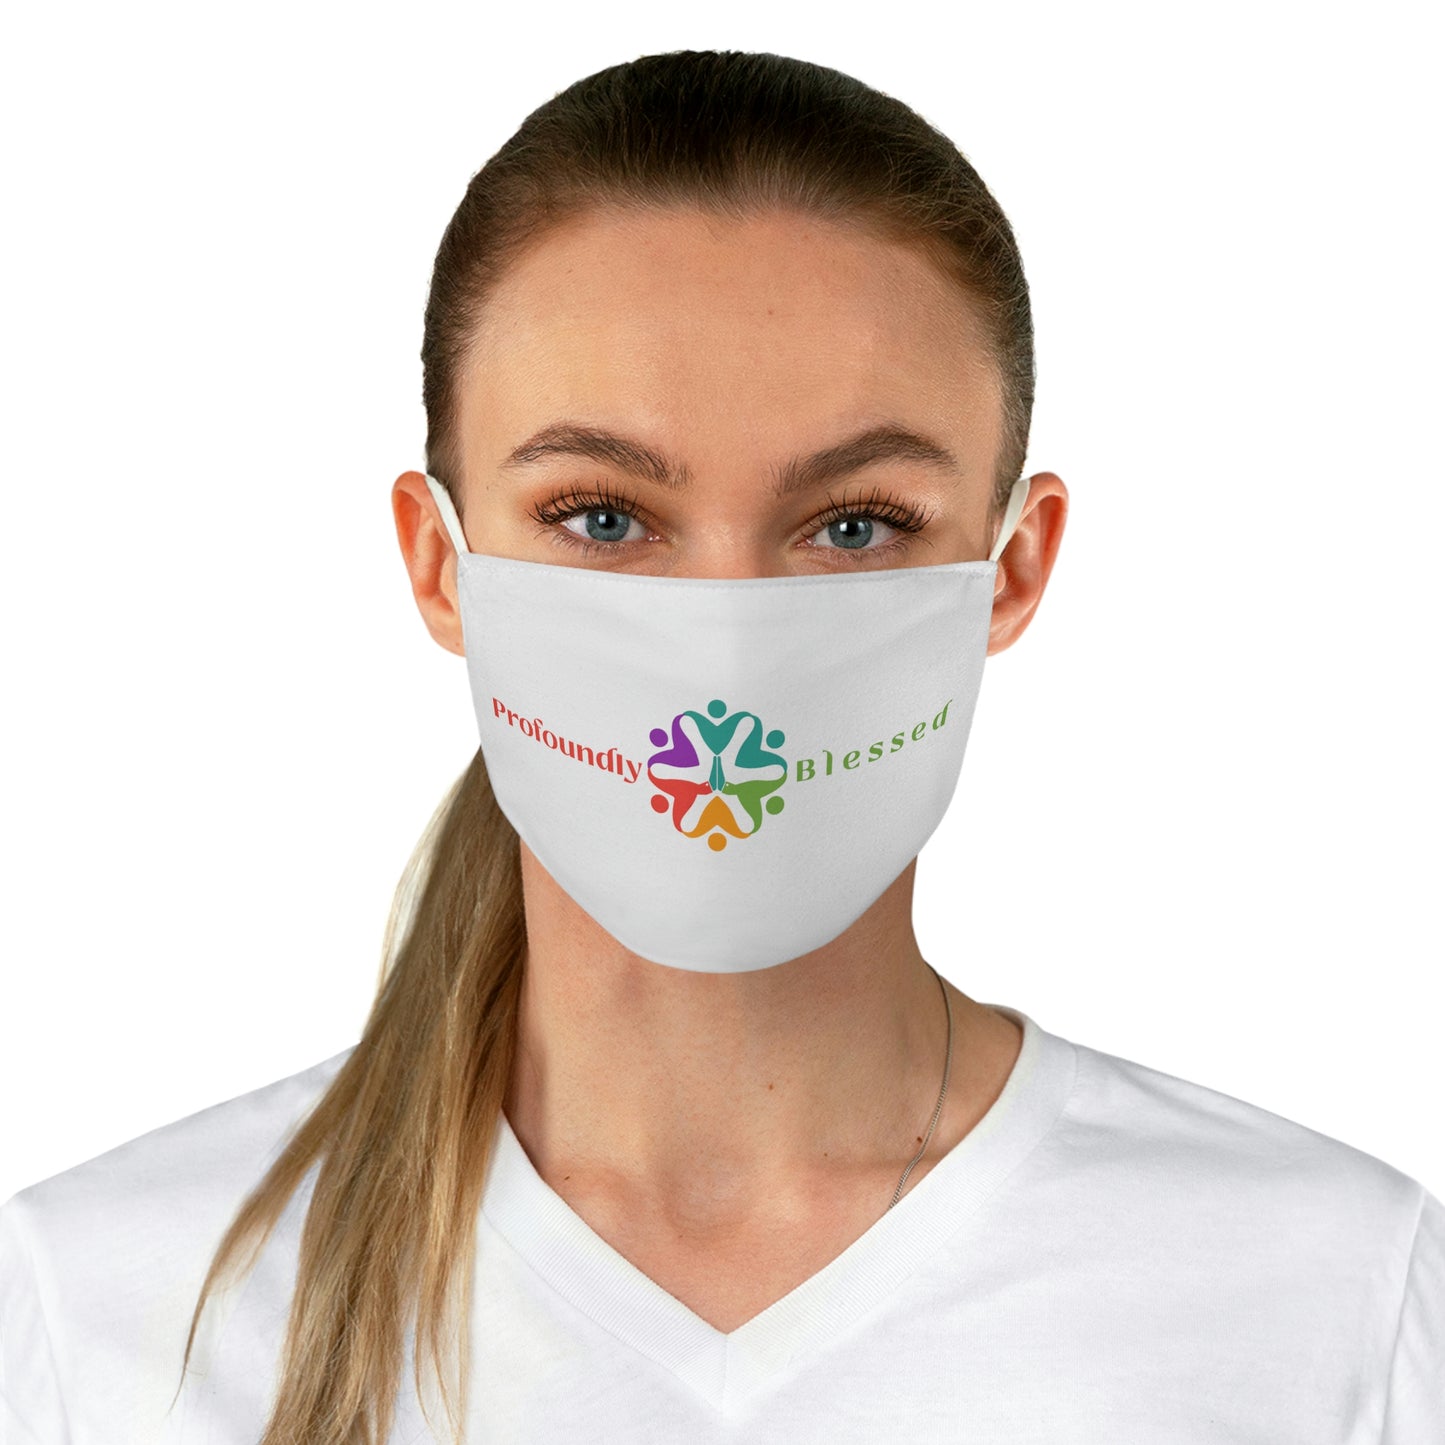 Profoundly Blessed Fabric Face Mask